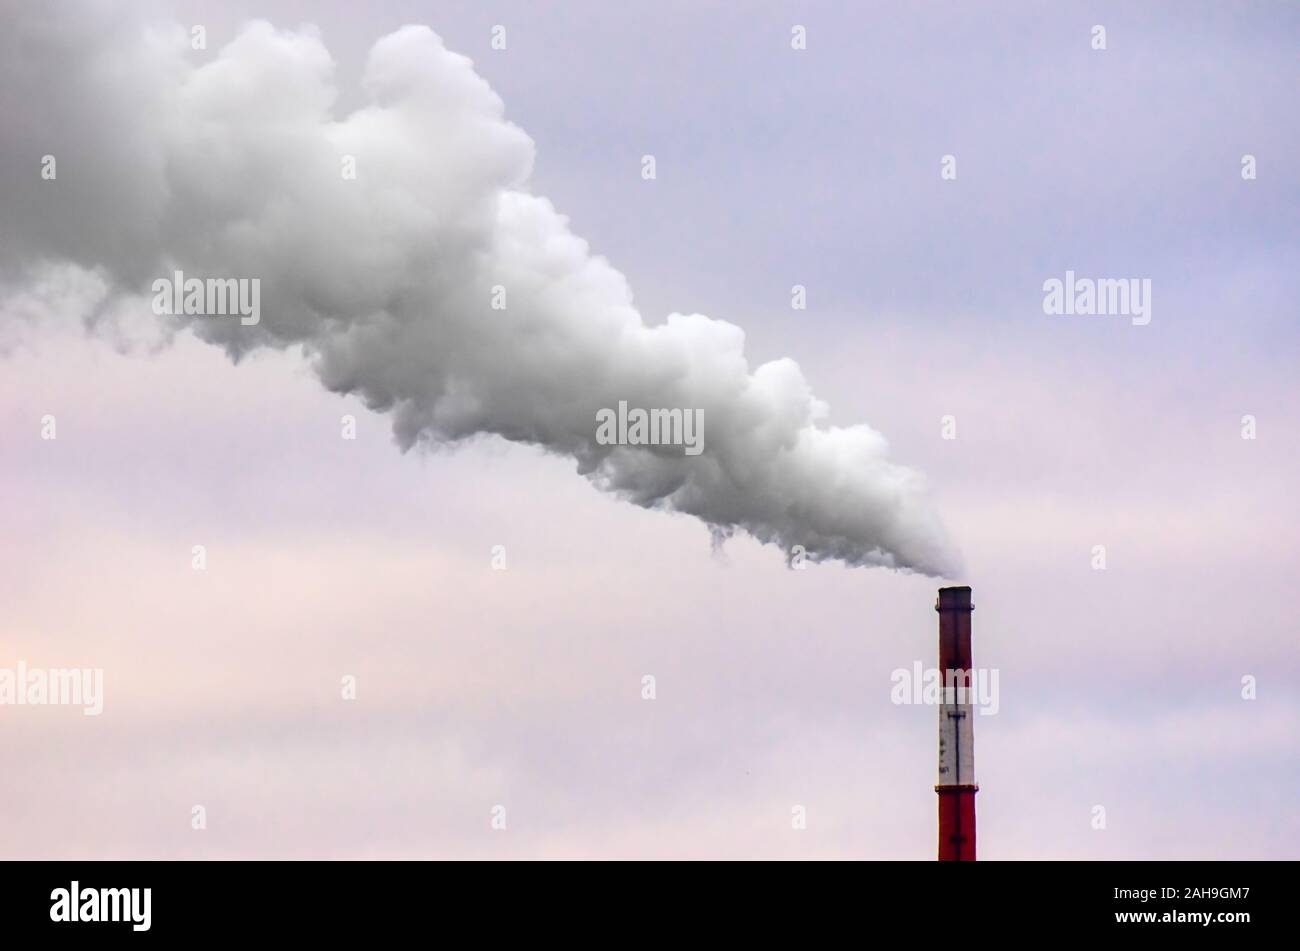 Smoking Tall Industrial Chimney on a Windy Overcast Day. Stock Photo